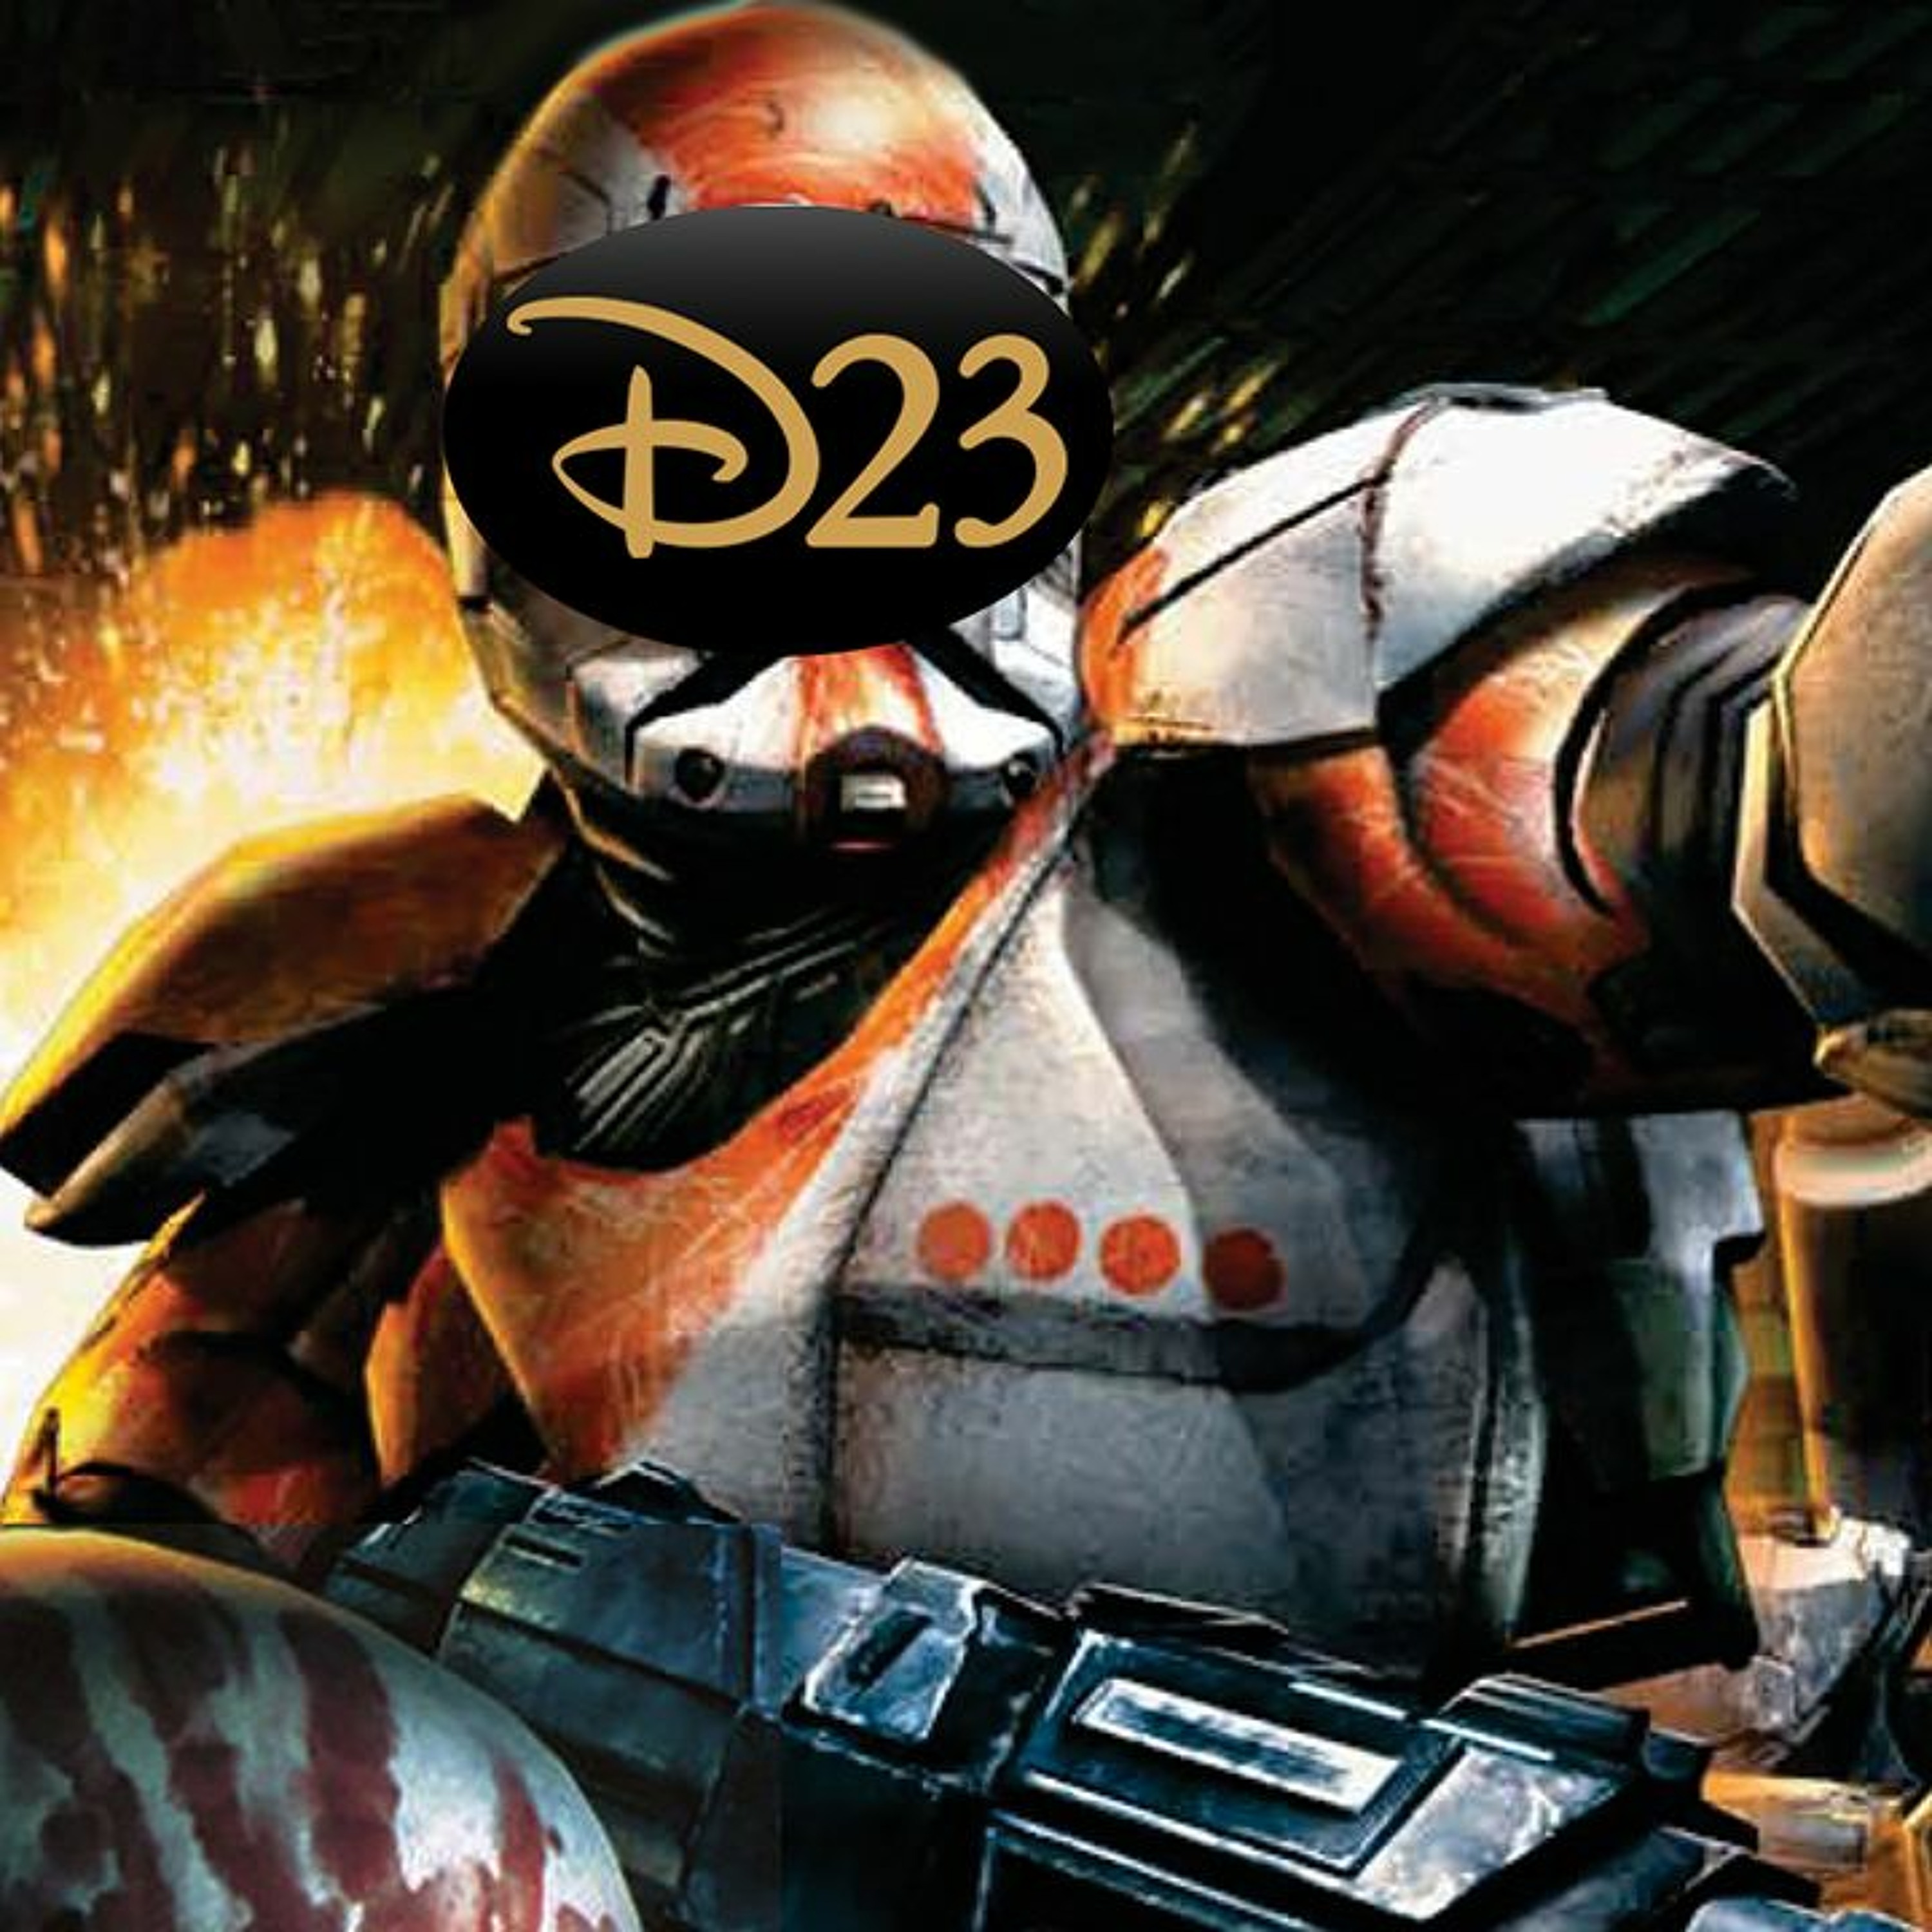 Episode 9 - D23, Lock and Load (with @DietCocaKoehler)